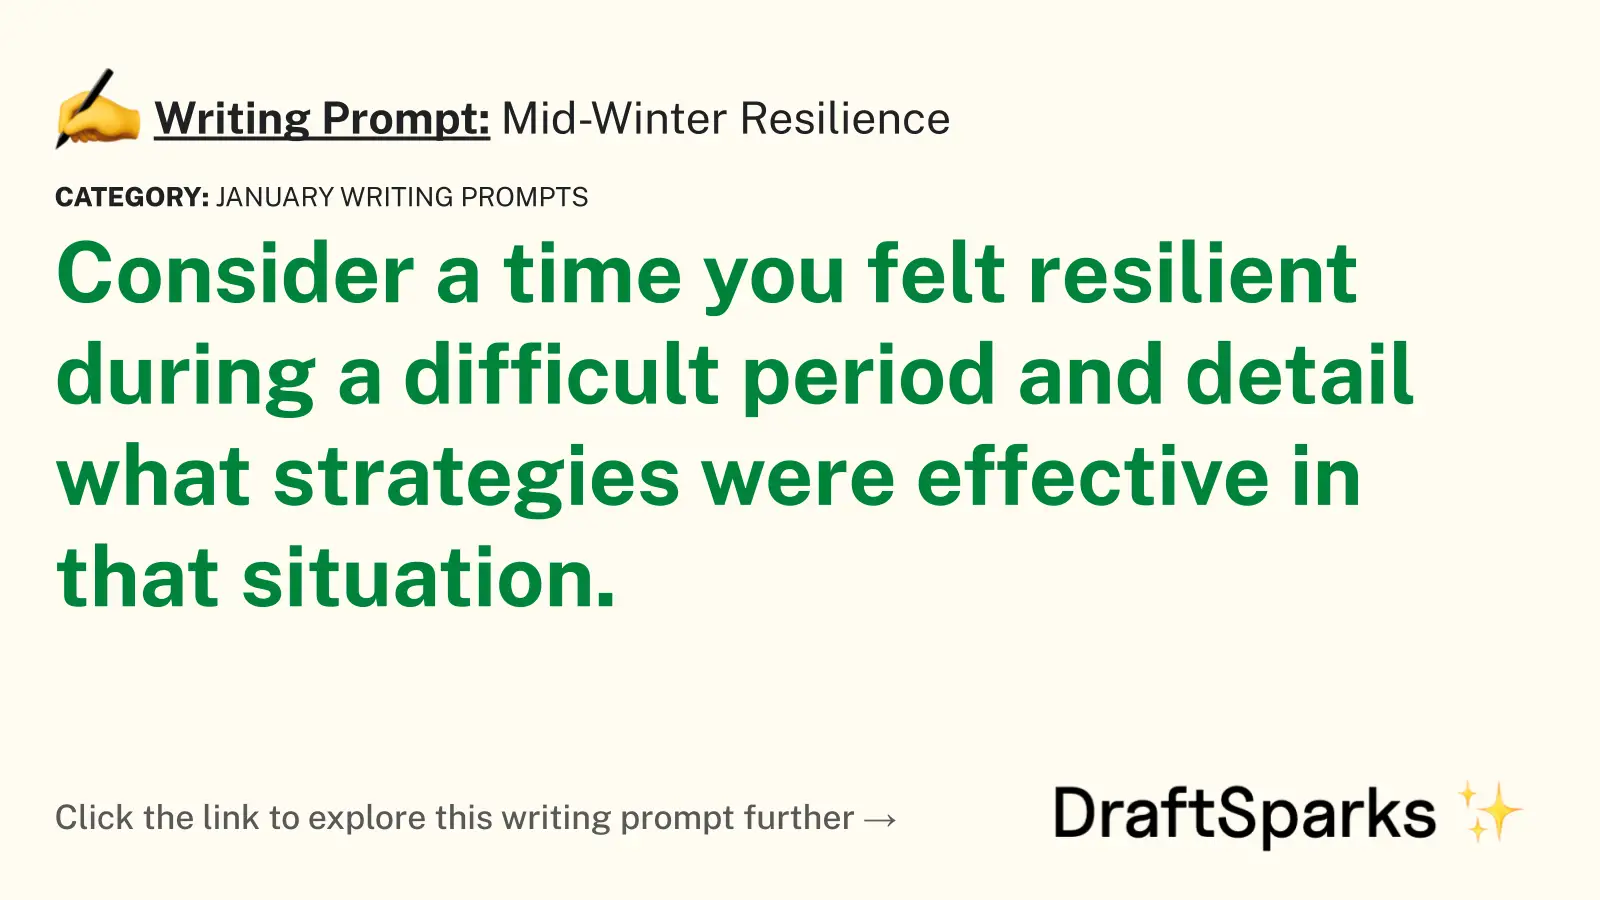 Mid-Winter Resilience